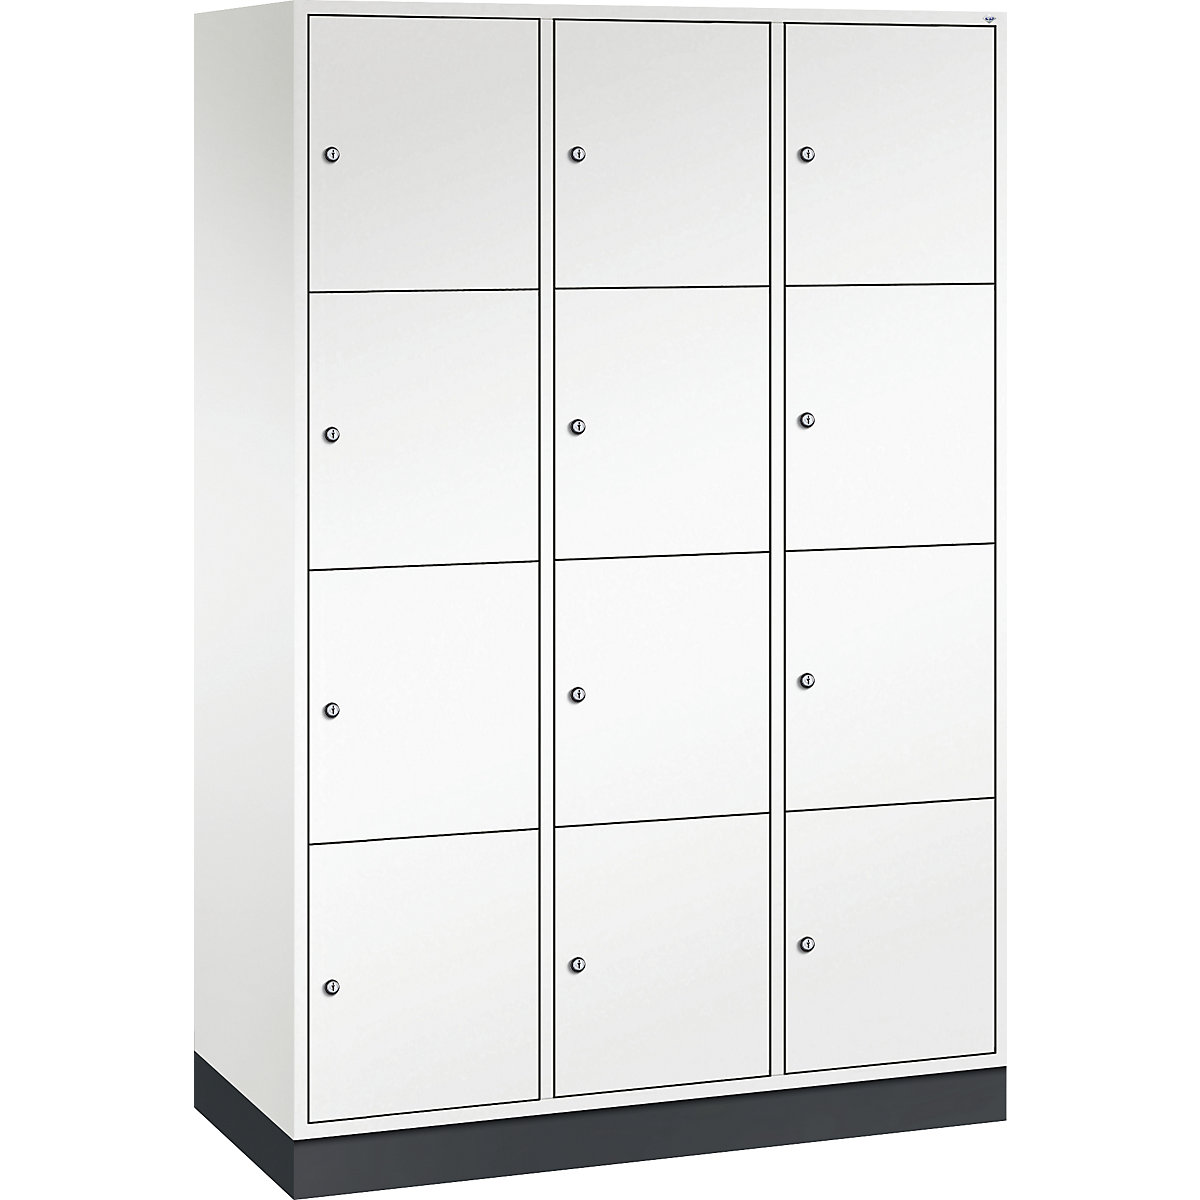 INTRO steel compartment locker, compartment height 435 mm – C+P, WxD 1220 x 500 mm, 12 compartments, pure white body, pure white doors